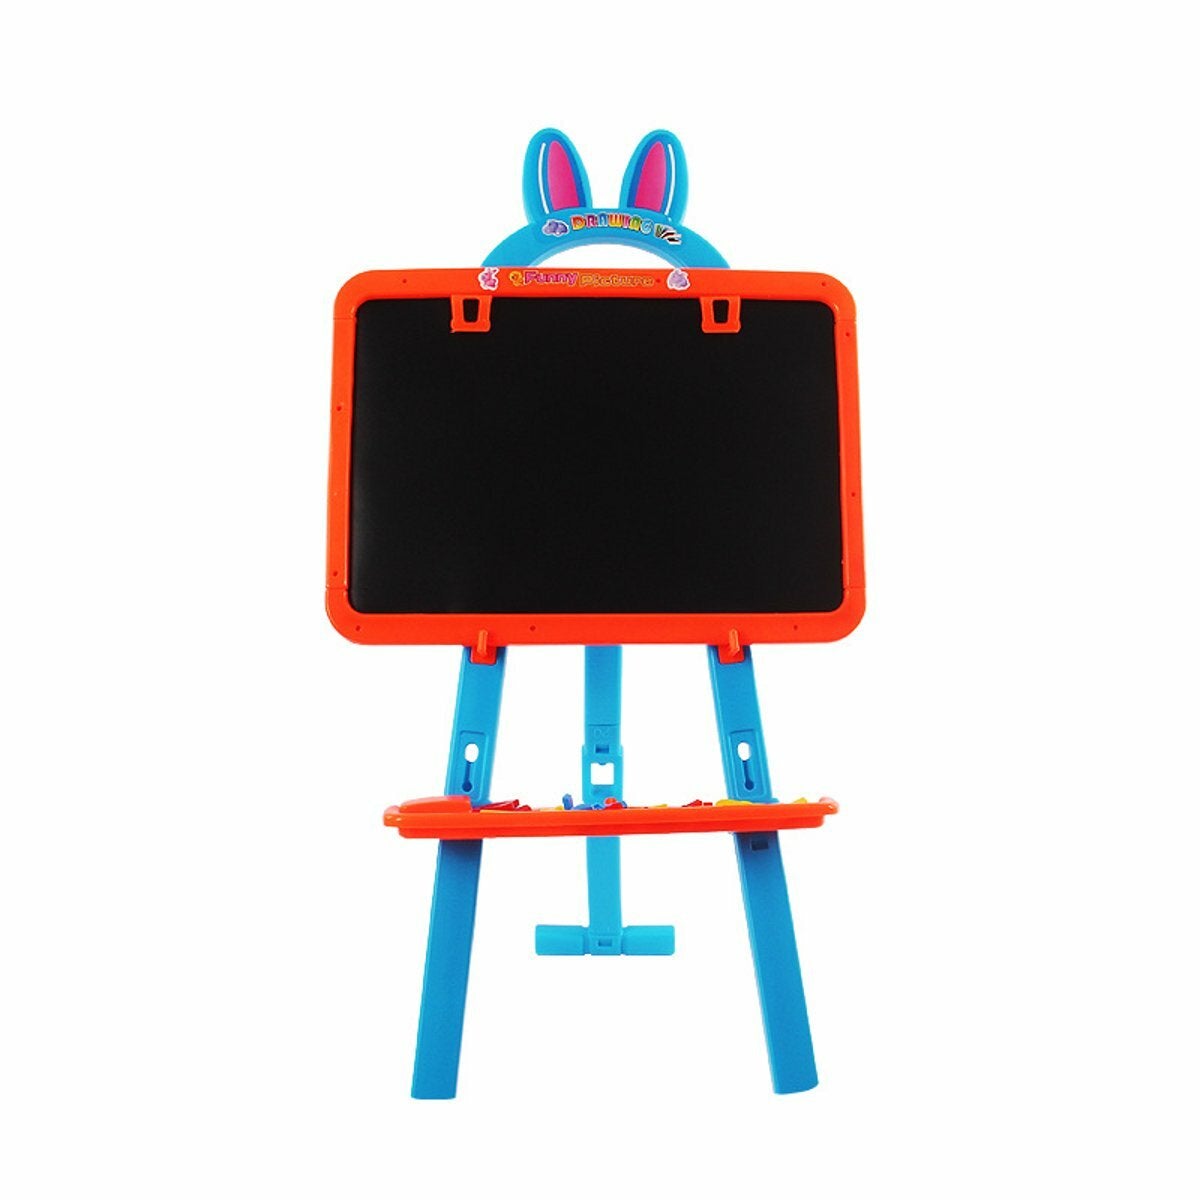 3 IN 1 Magnetic Writing Drawing Board Double Side Learning Easel Educational Toys for Kids